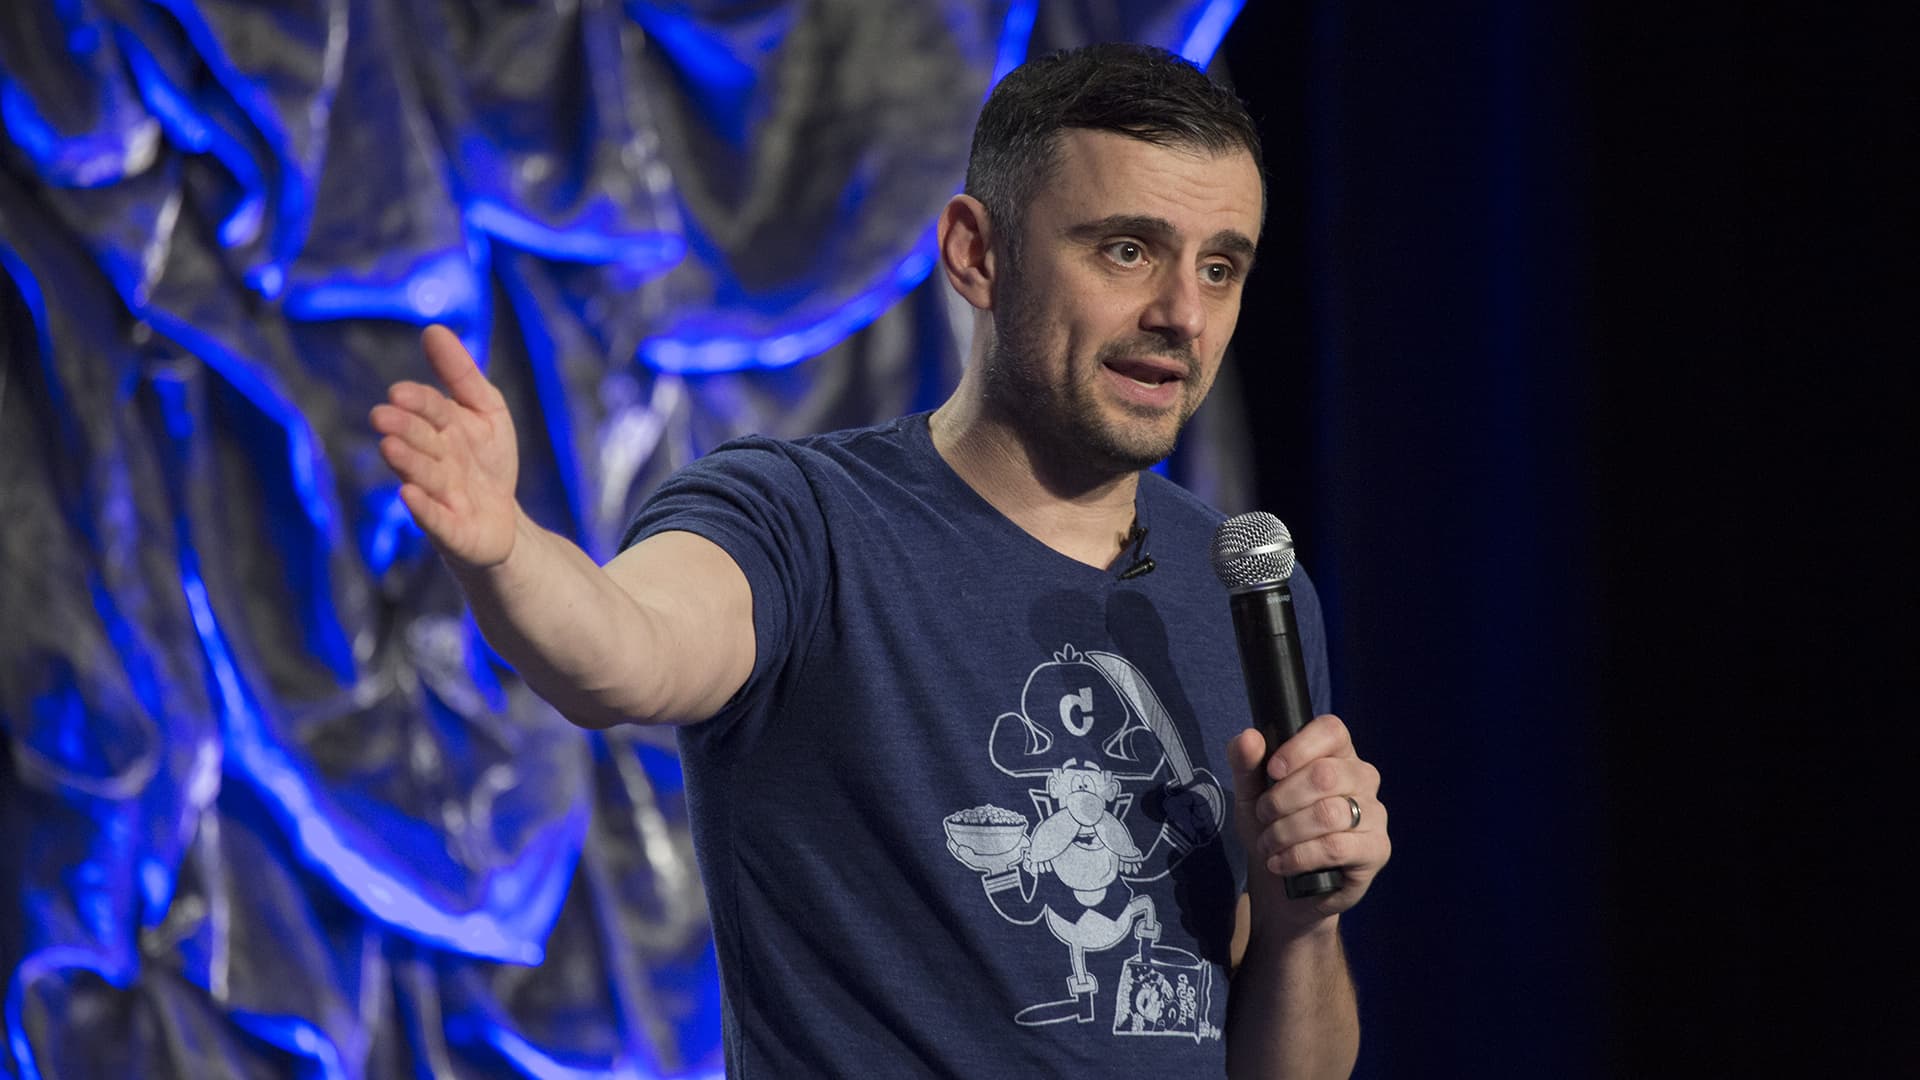 Gary Vee: The three social media requirements for business success